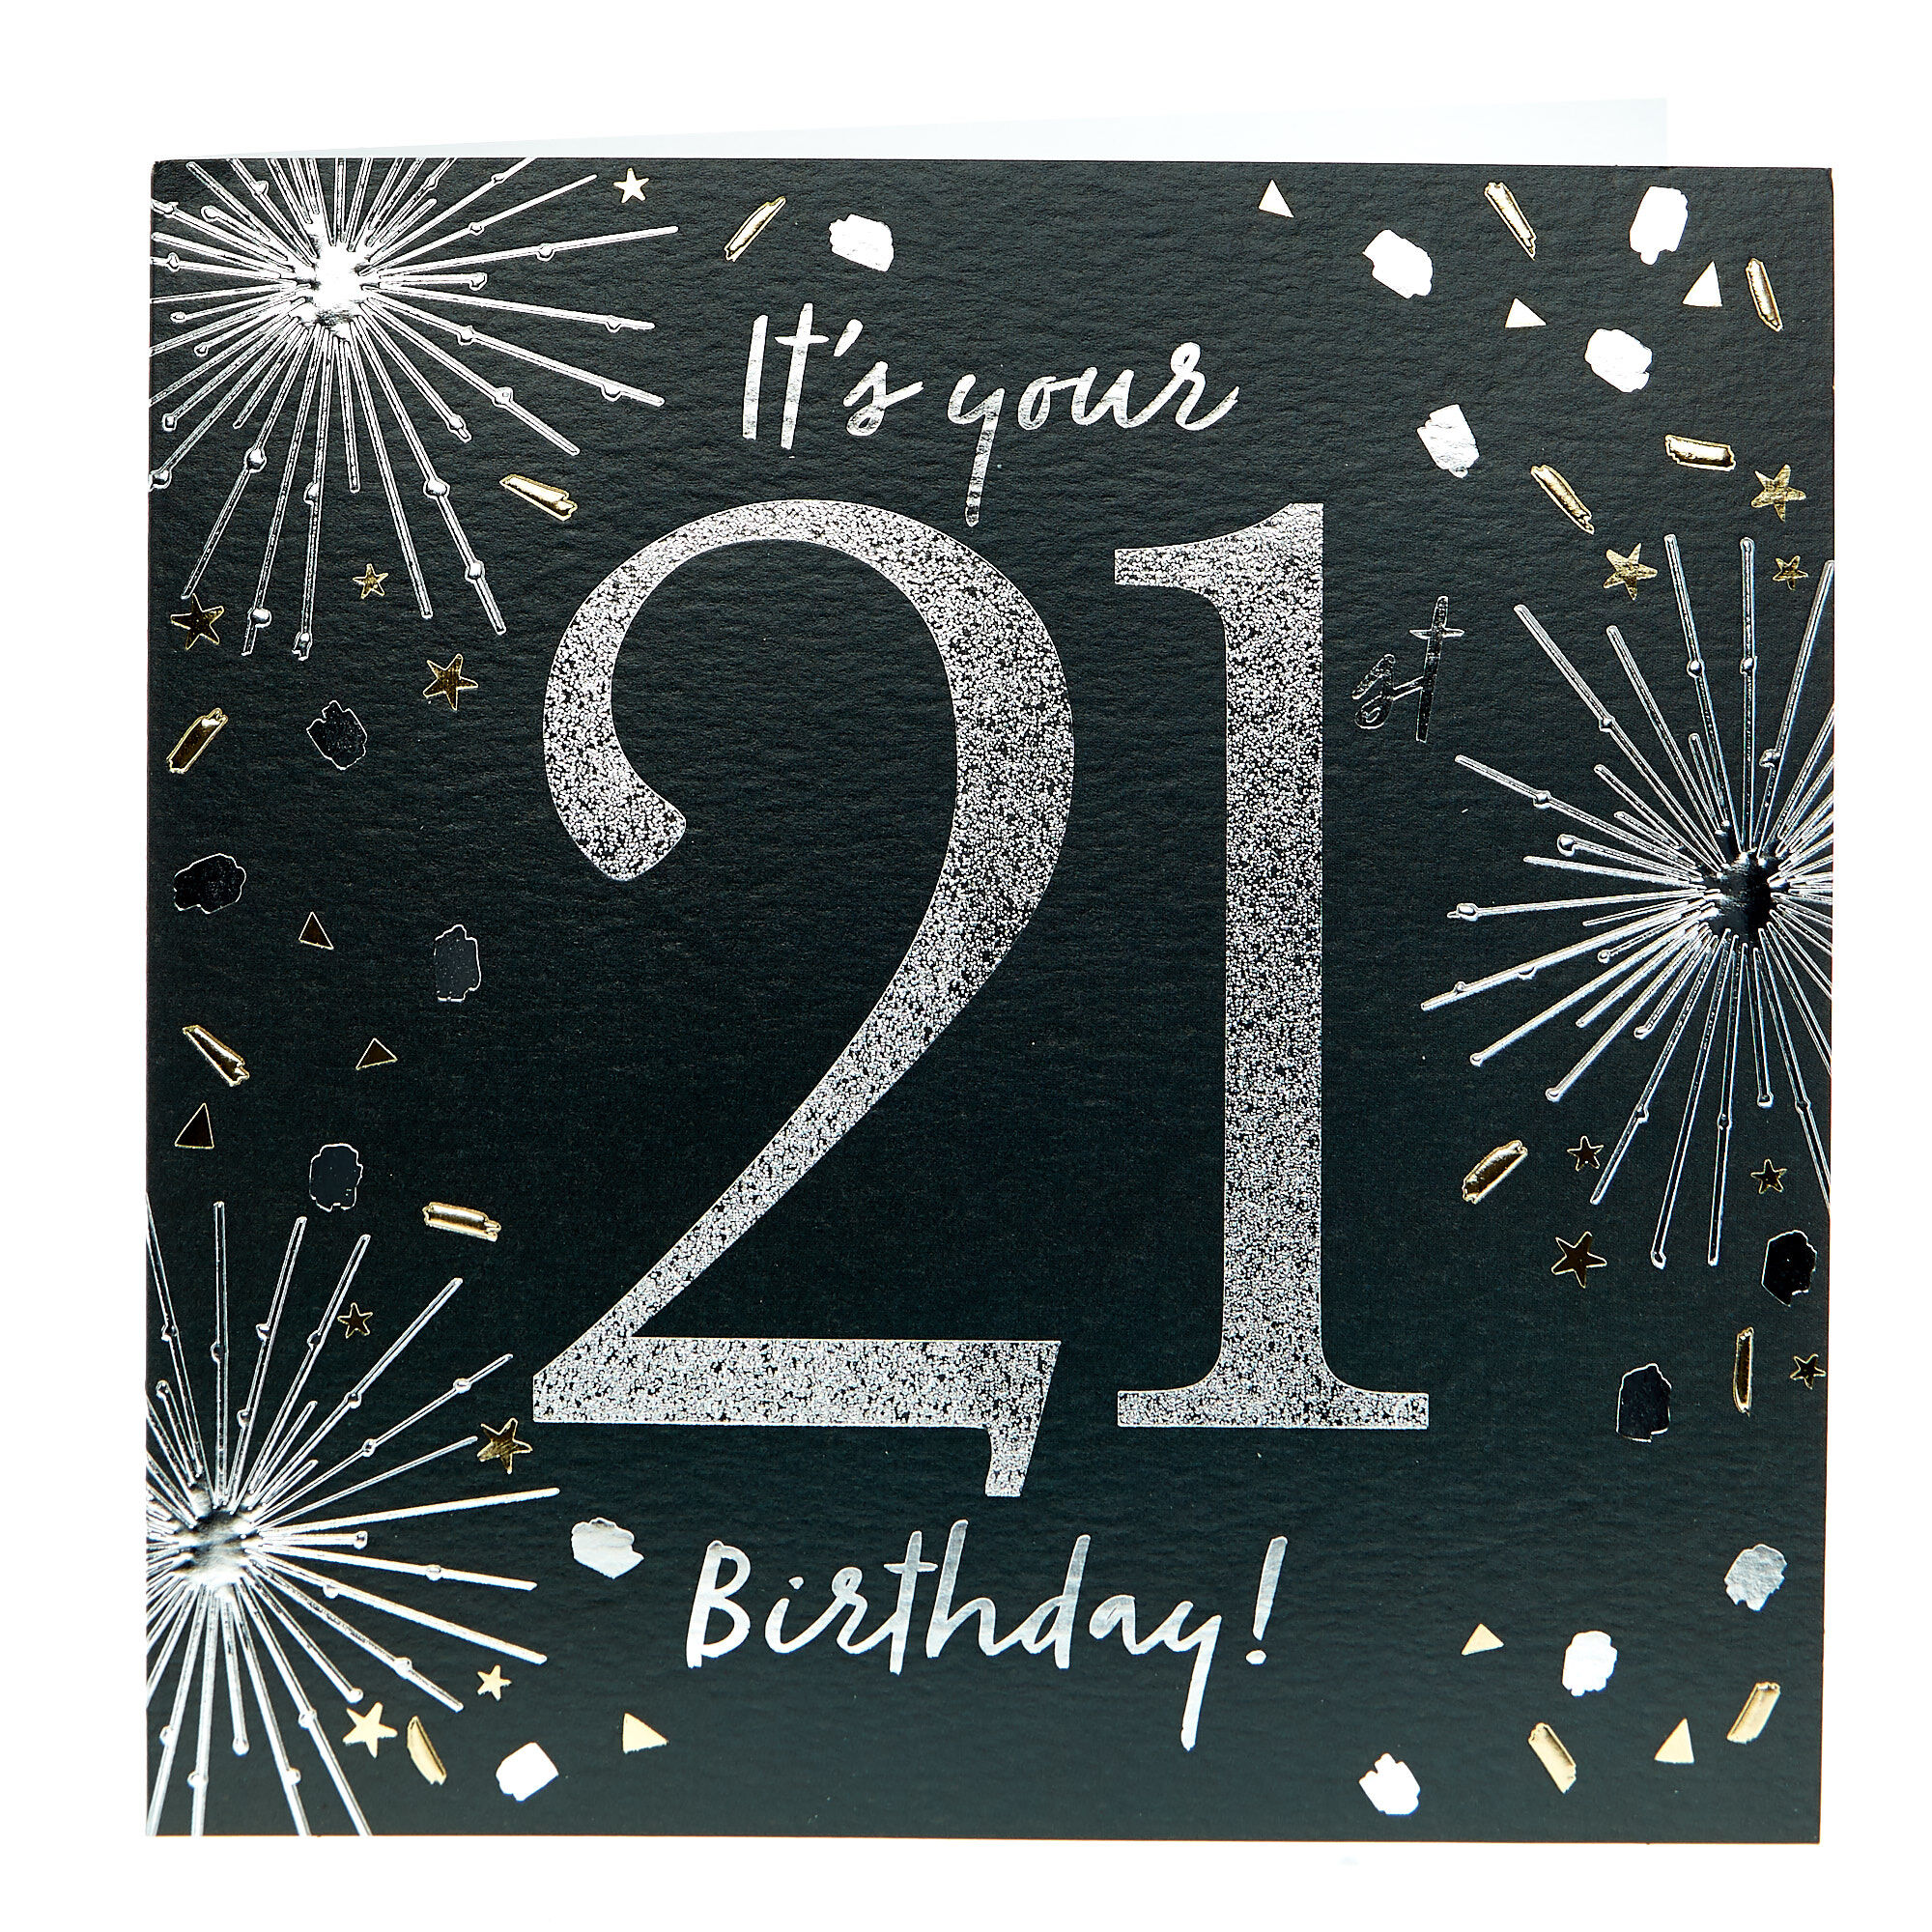 Buy Platinum Collection 21st Birthday Card - Black & Gold for GBP 1.49